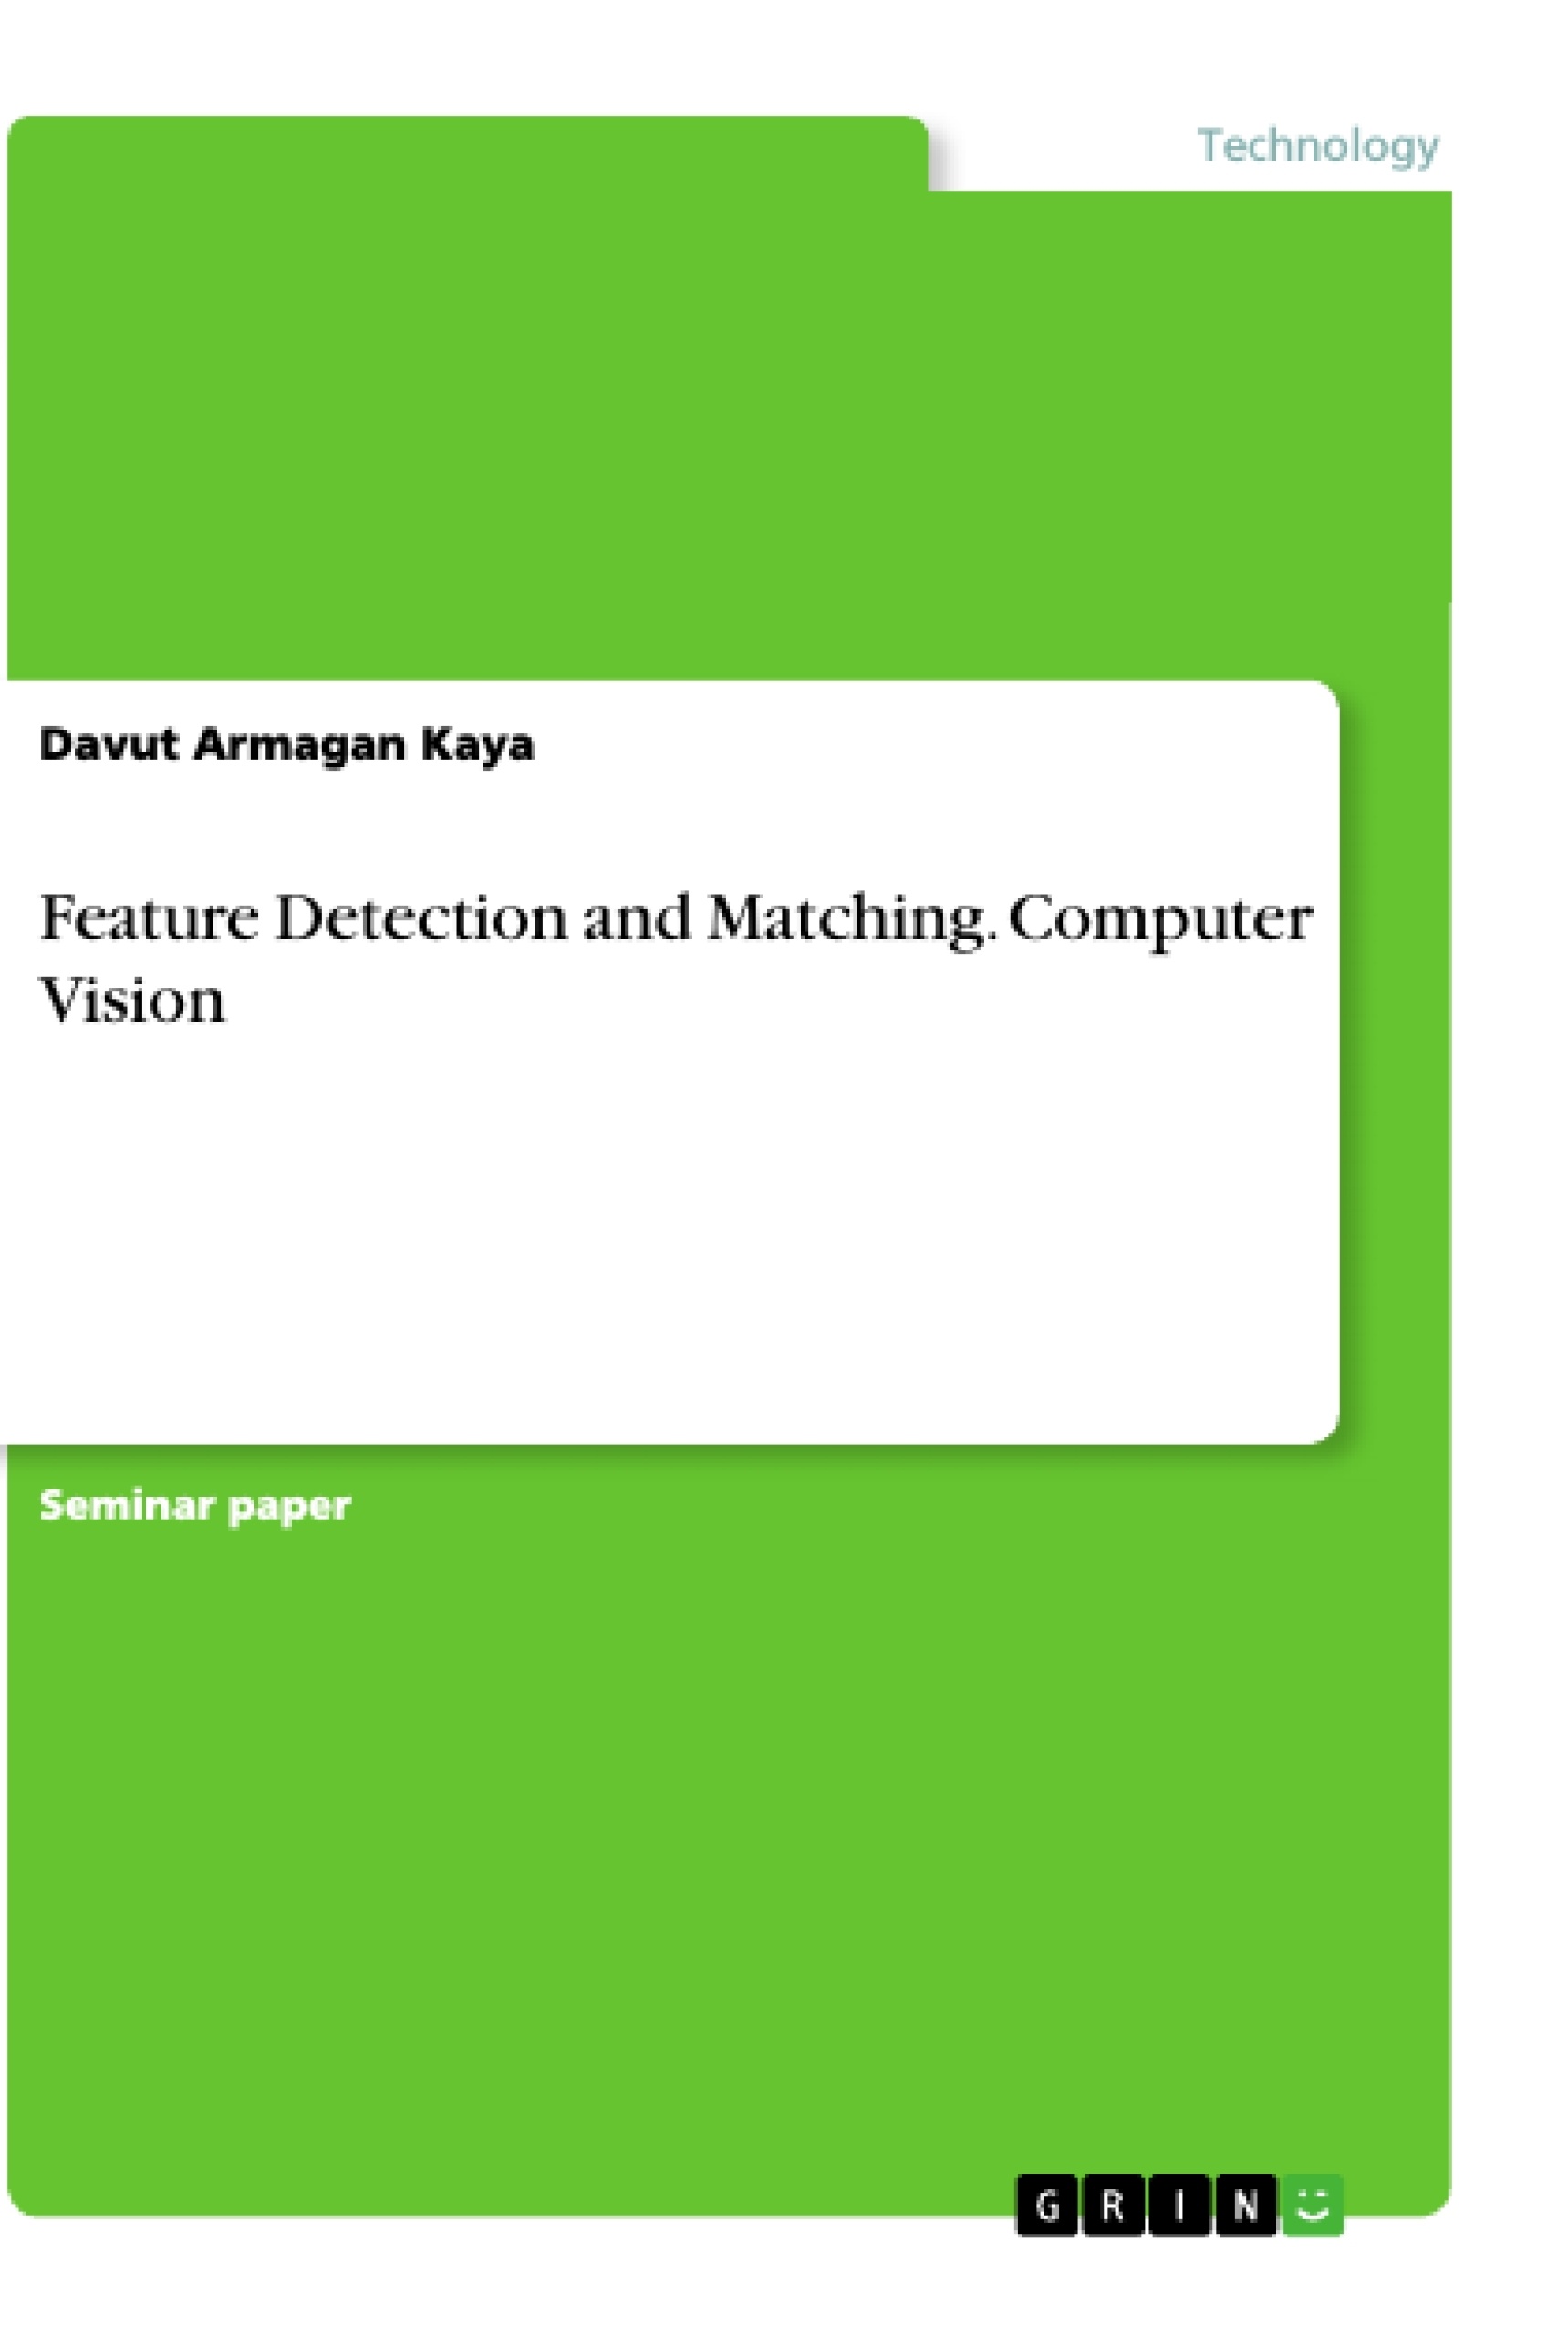 Title: Feature Detection and Matching. Computer Vision